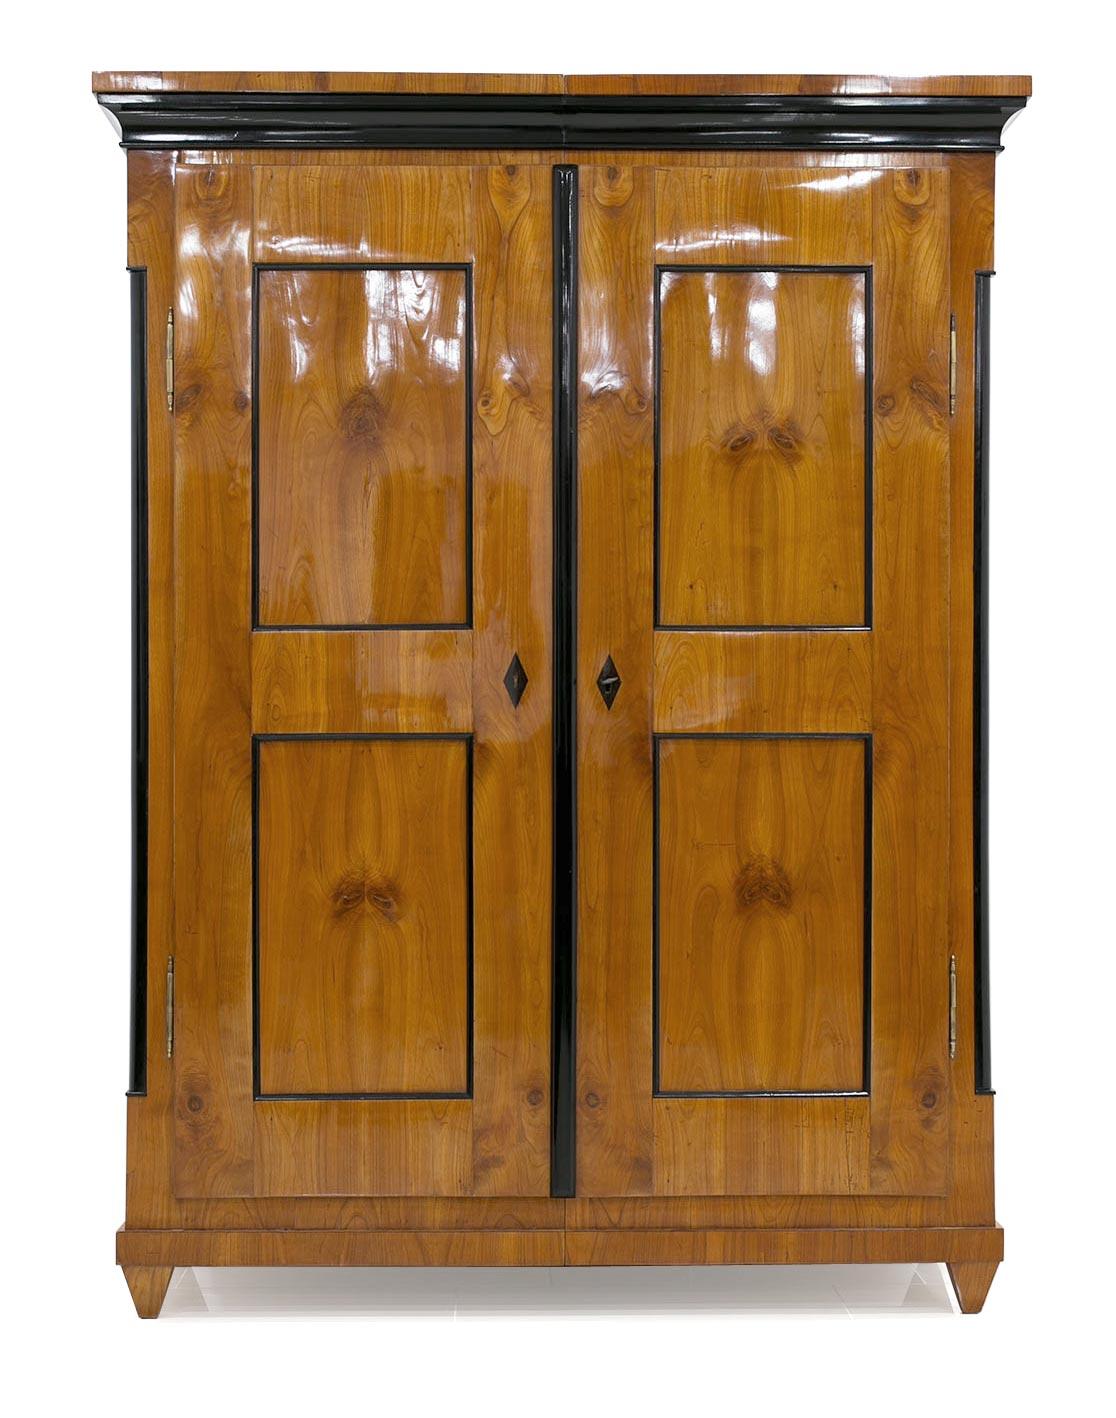 This Biedermeier wardrobe was made circa 1820 in Germany. The piece was subjected to a professional and careful renovation. The wardrobe is finished with hand-applied polishes.
It is made of solid wood, veneered with cherrywood. The construction is